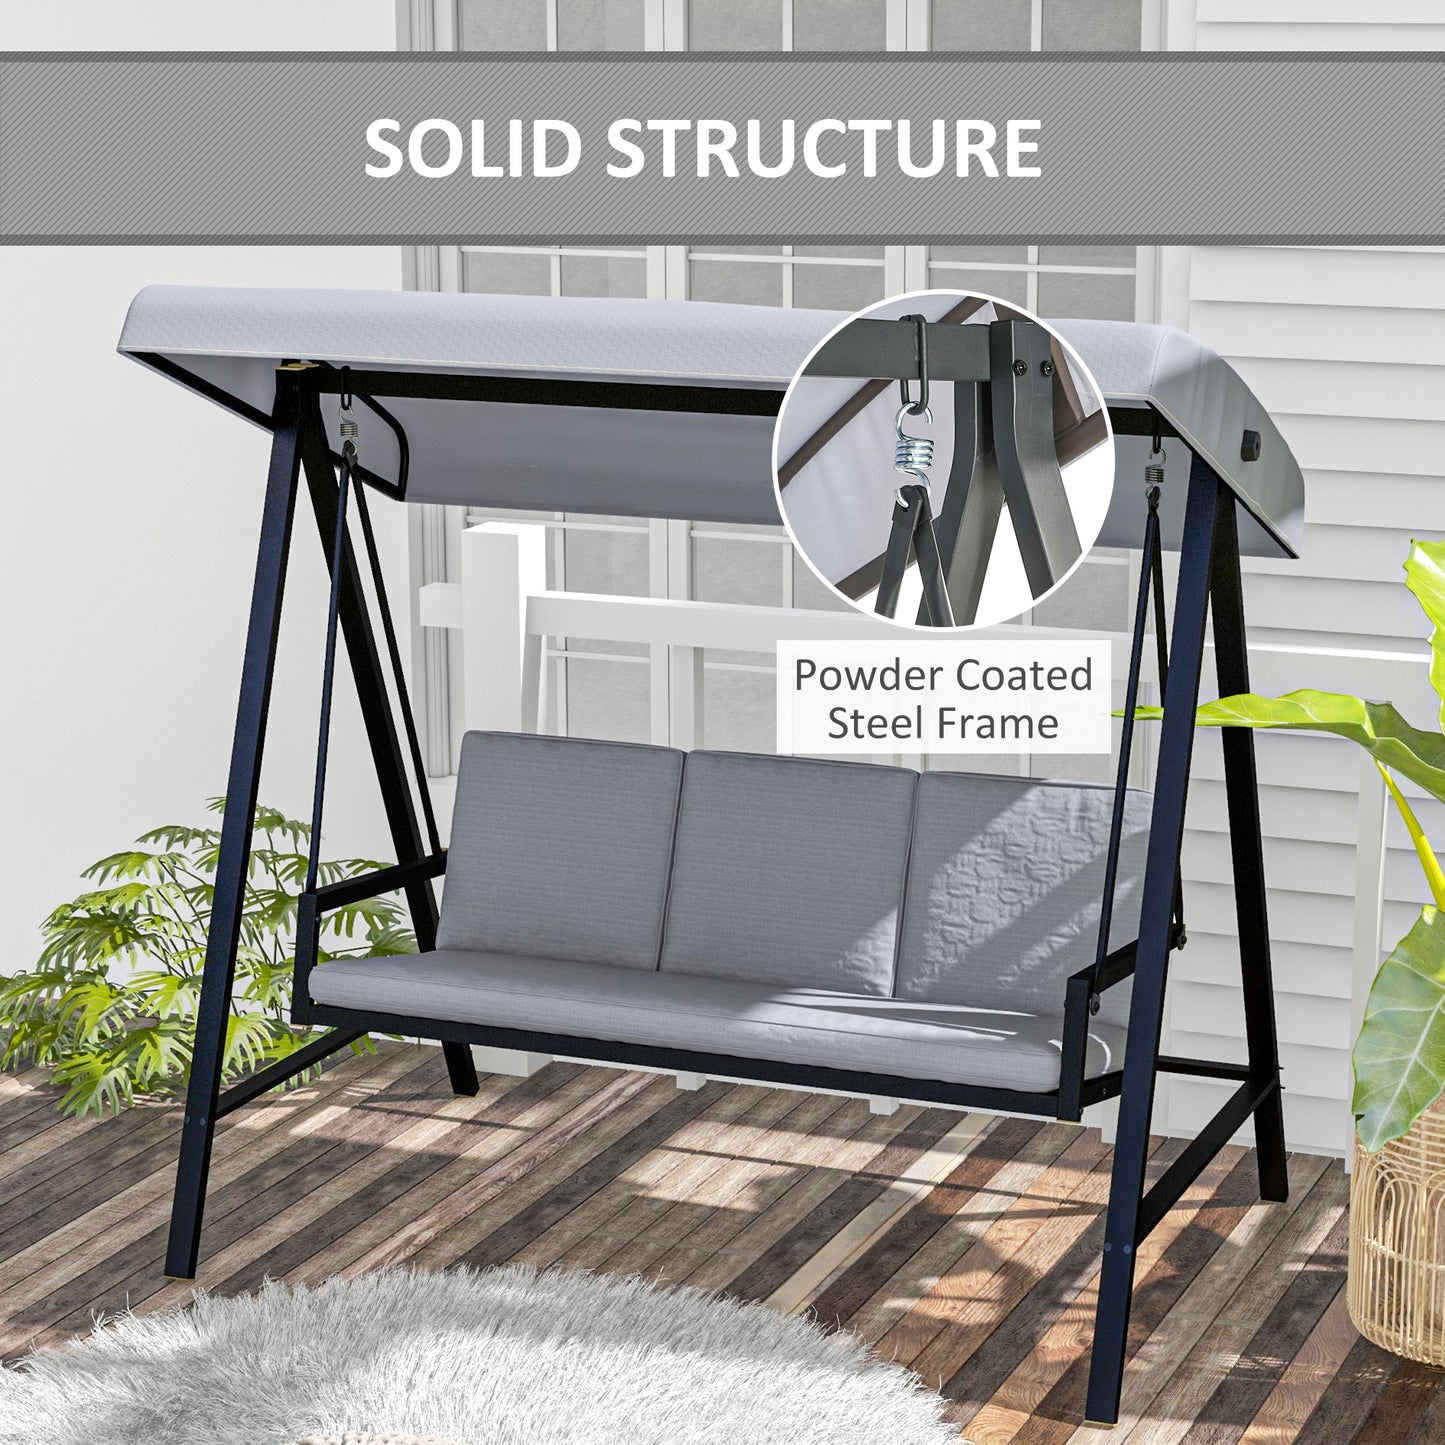 Outsunny 3 Seater Garden Swing Chair, Outdoor Hammock Bench with Adjustable Canopy, Removable Cushions and Steel Frame, Grey